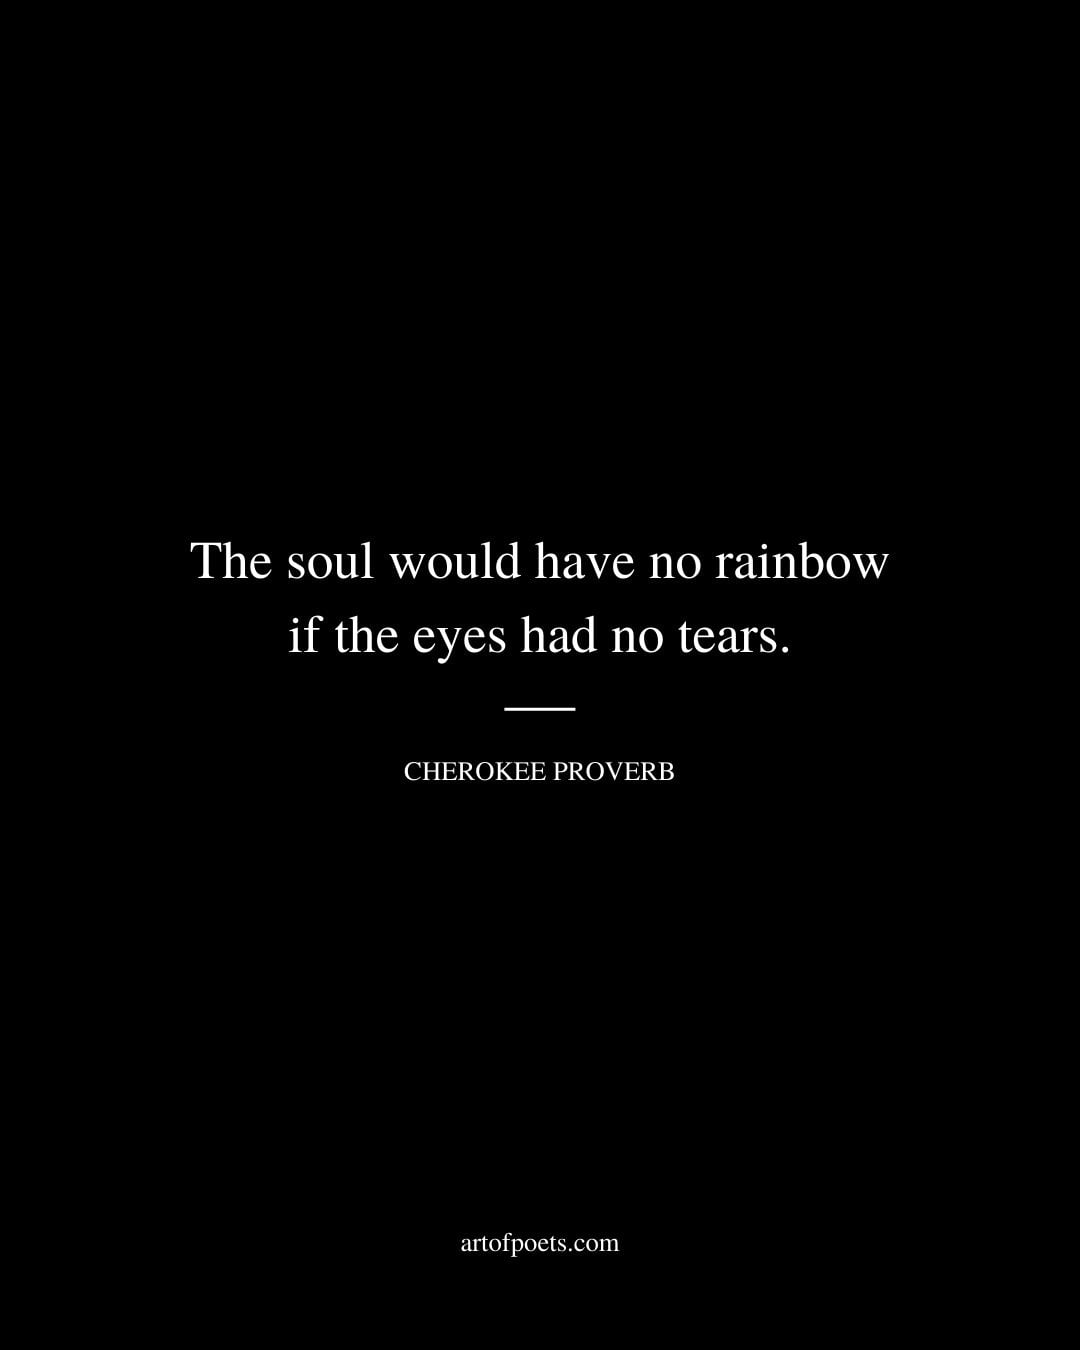 The soul would have no rainbow if the eyes had no tears